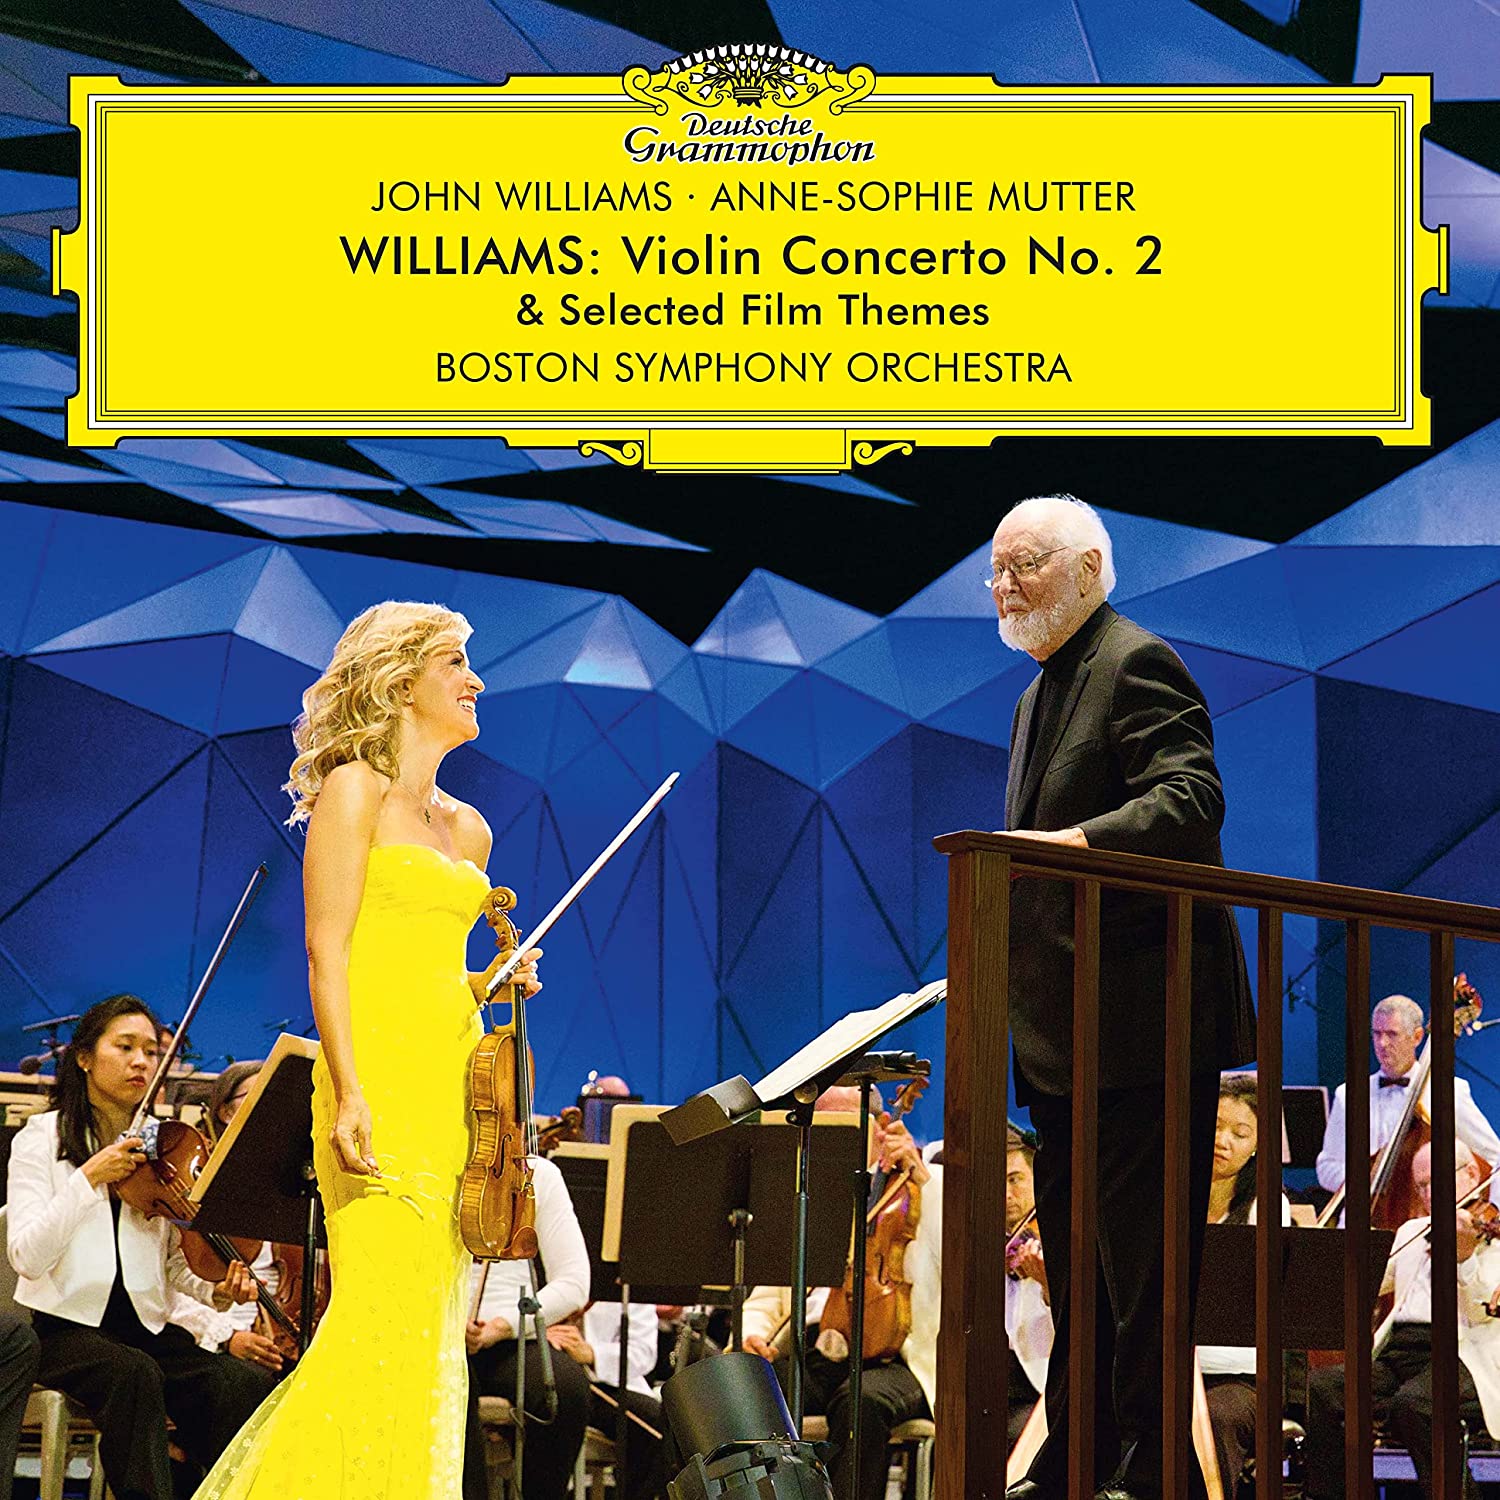 Williams: Violin Concerto No. 2 & Selected Film Themes | John Williams, Anne-Sophie Mutter, Boston Symphony Orchestra Anne-Sophie poza noua